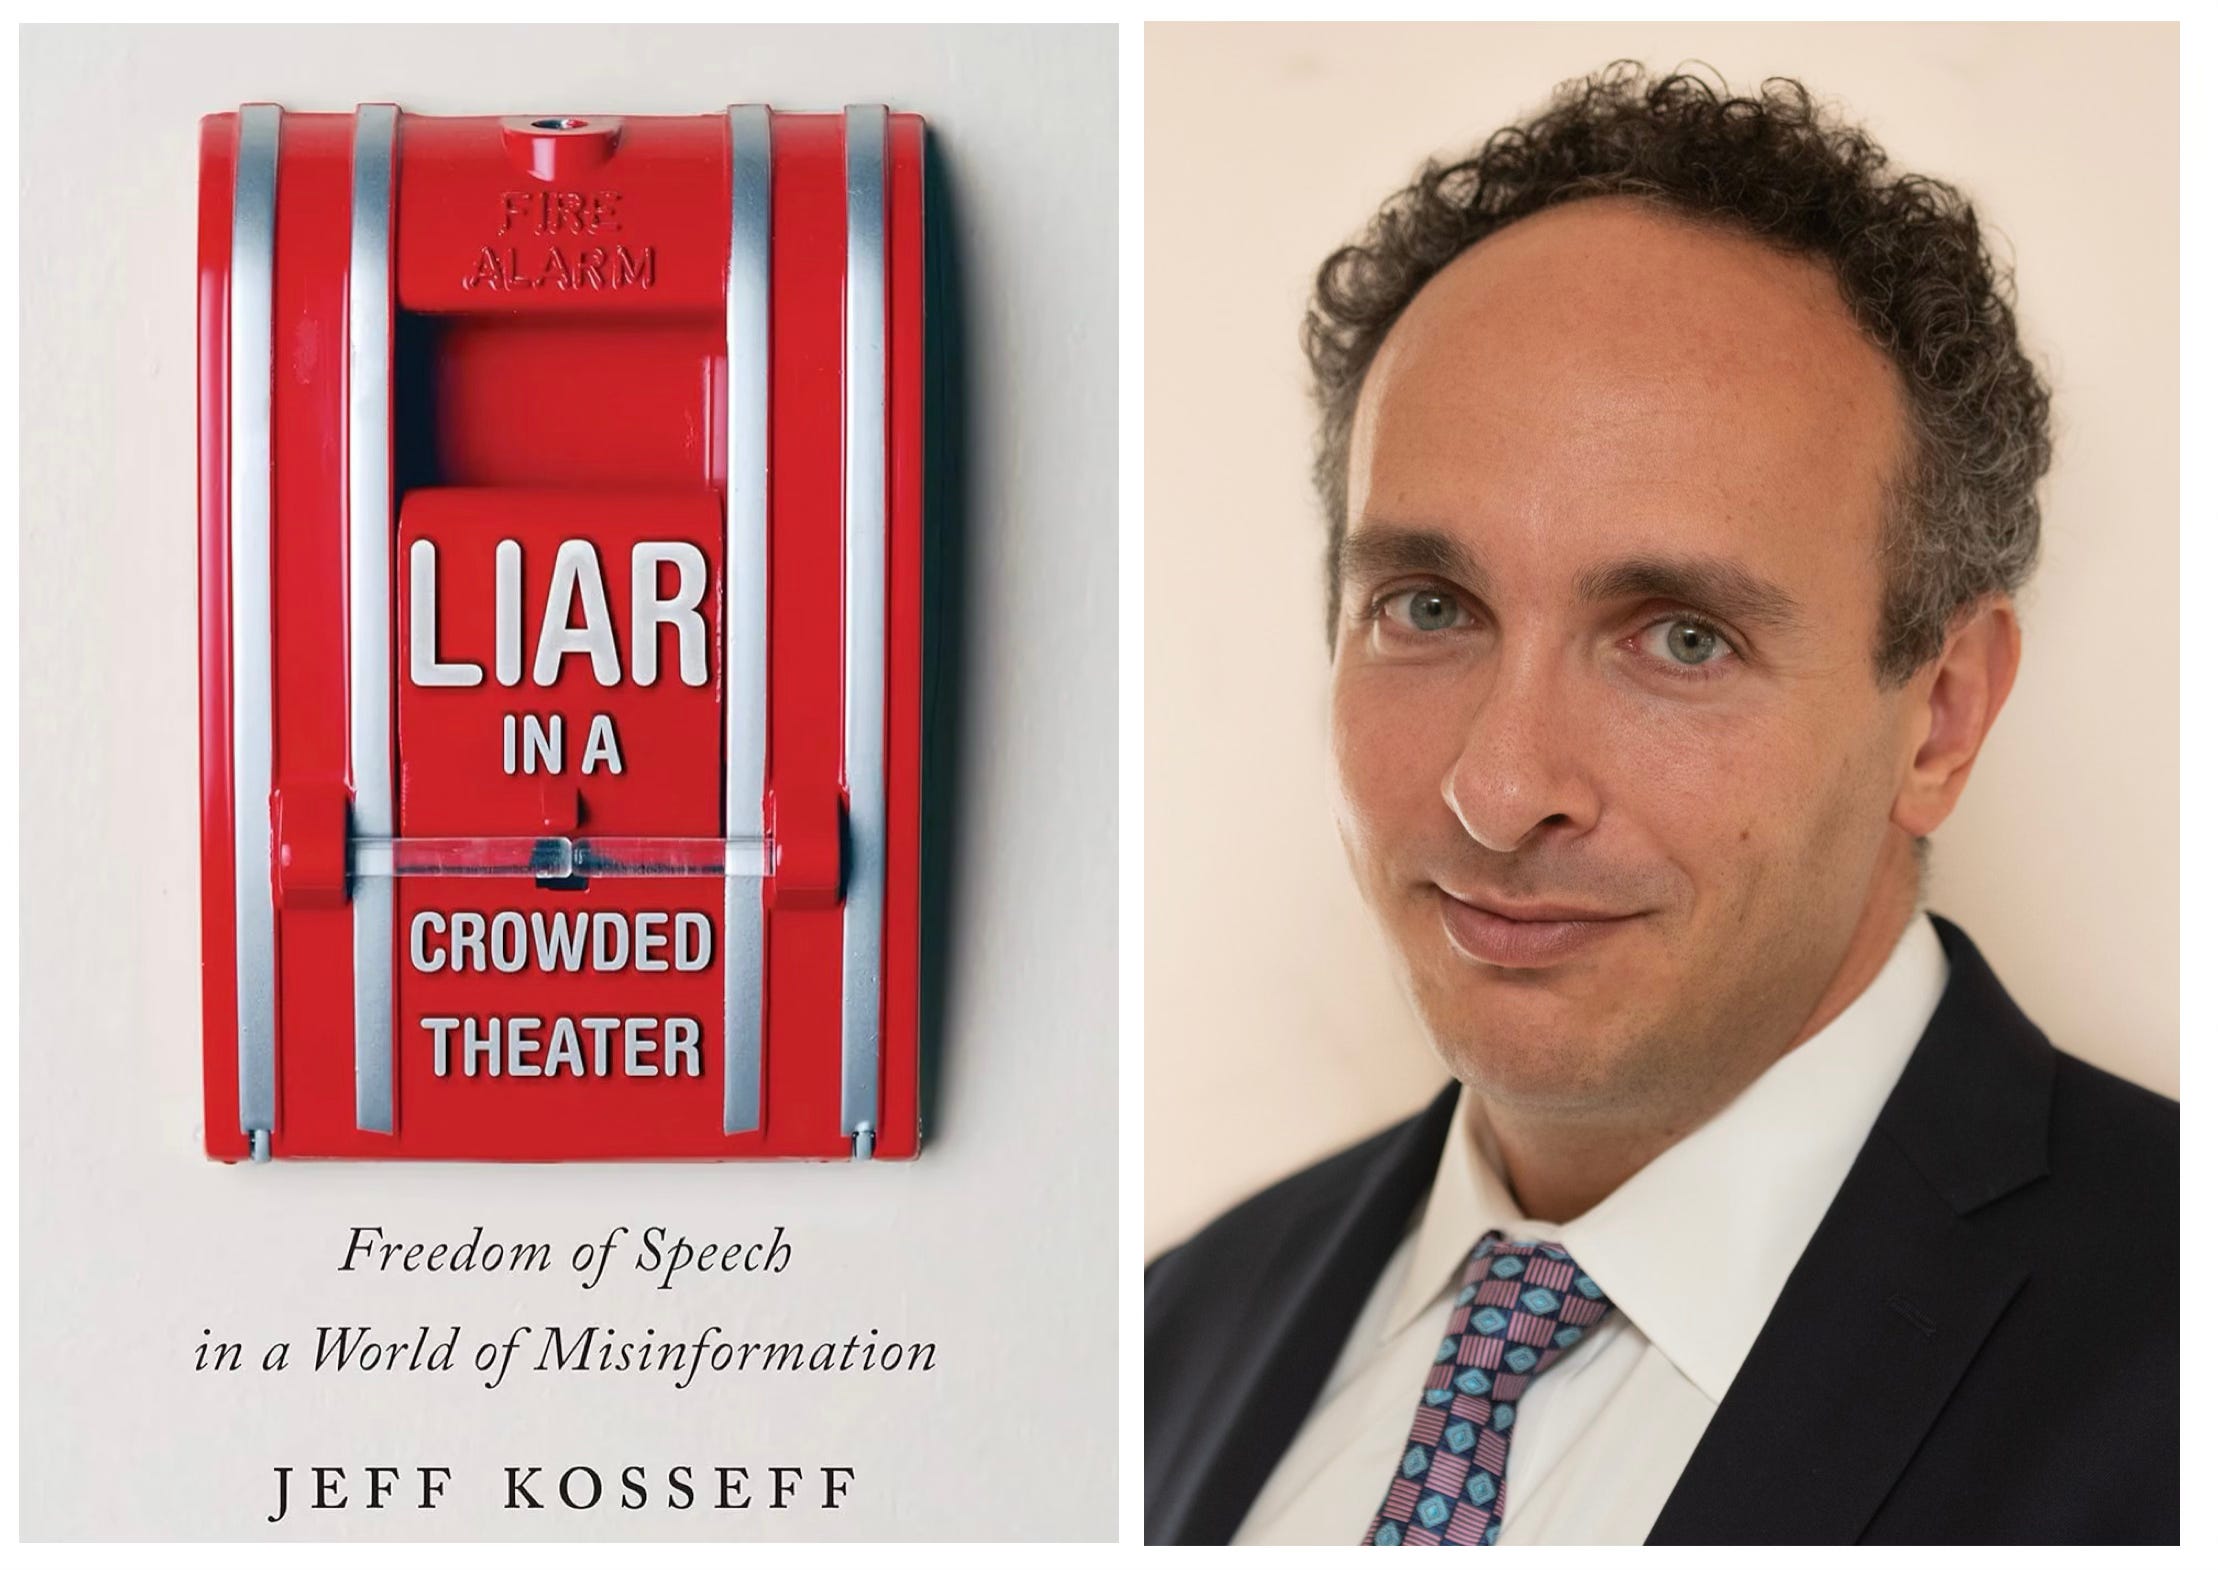 Jeff Kosseff: "Hey, Let's Not Rethink The First Amendment"